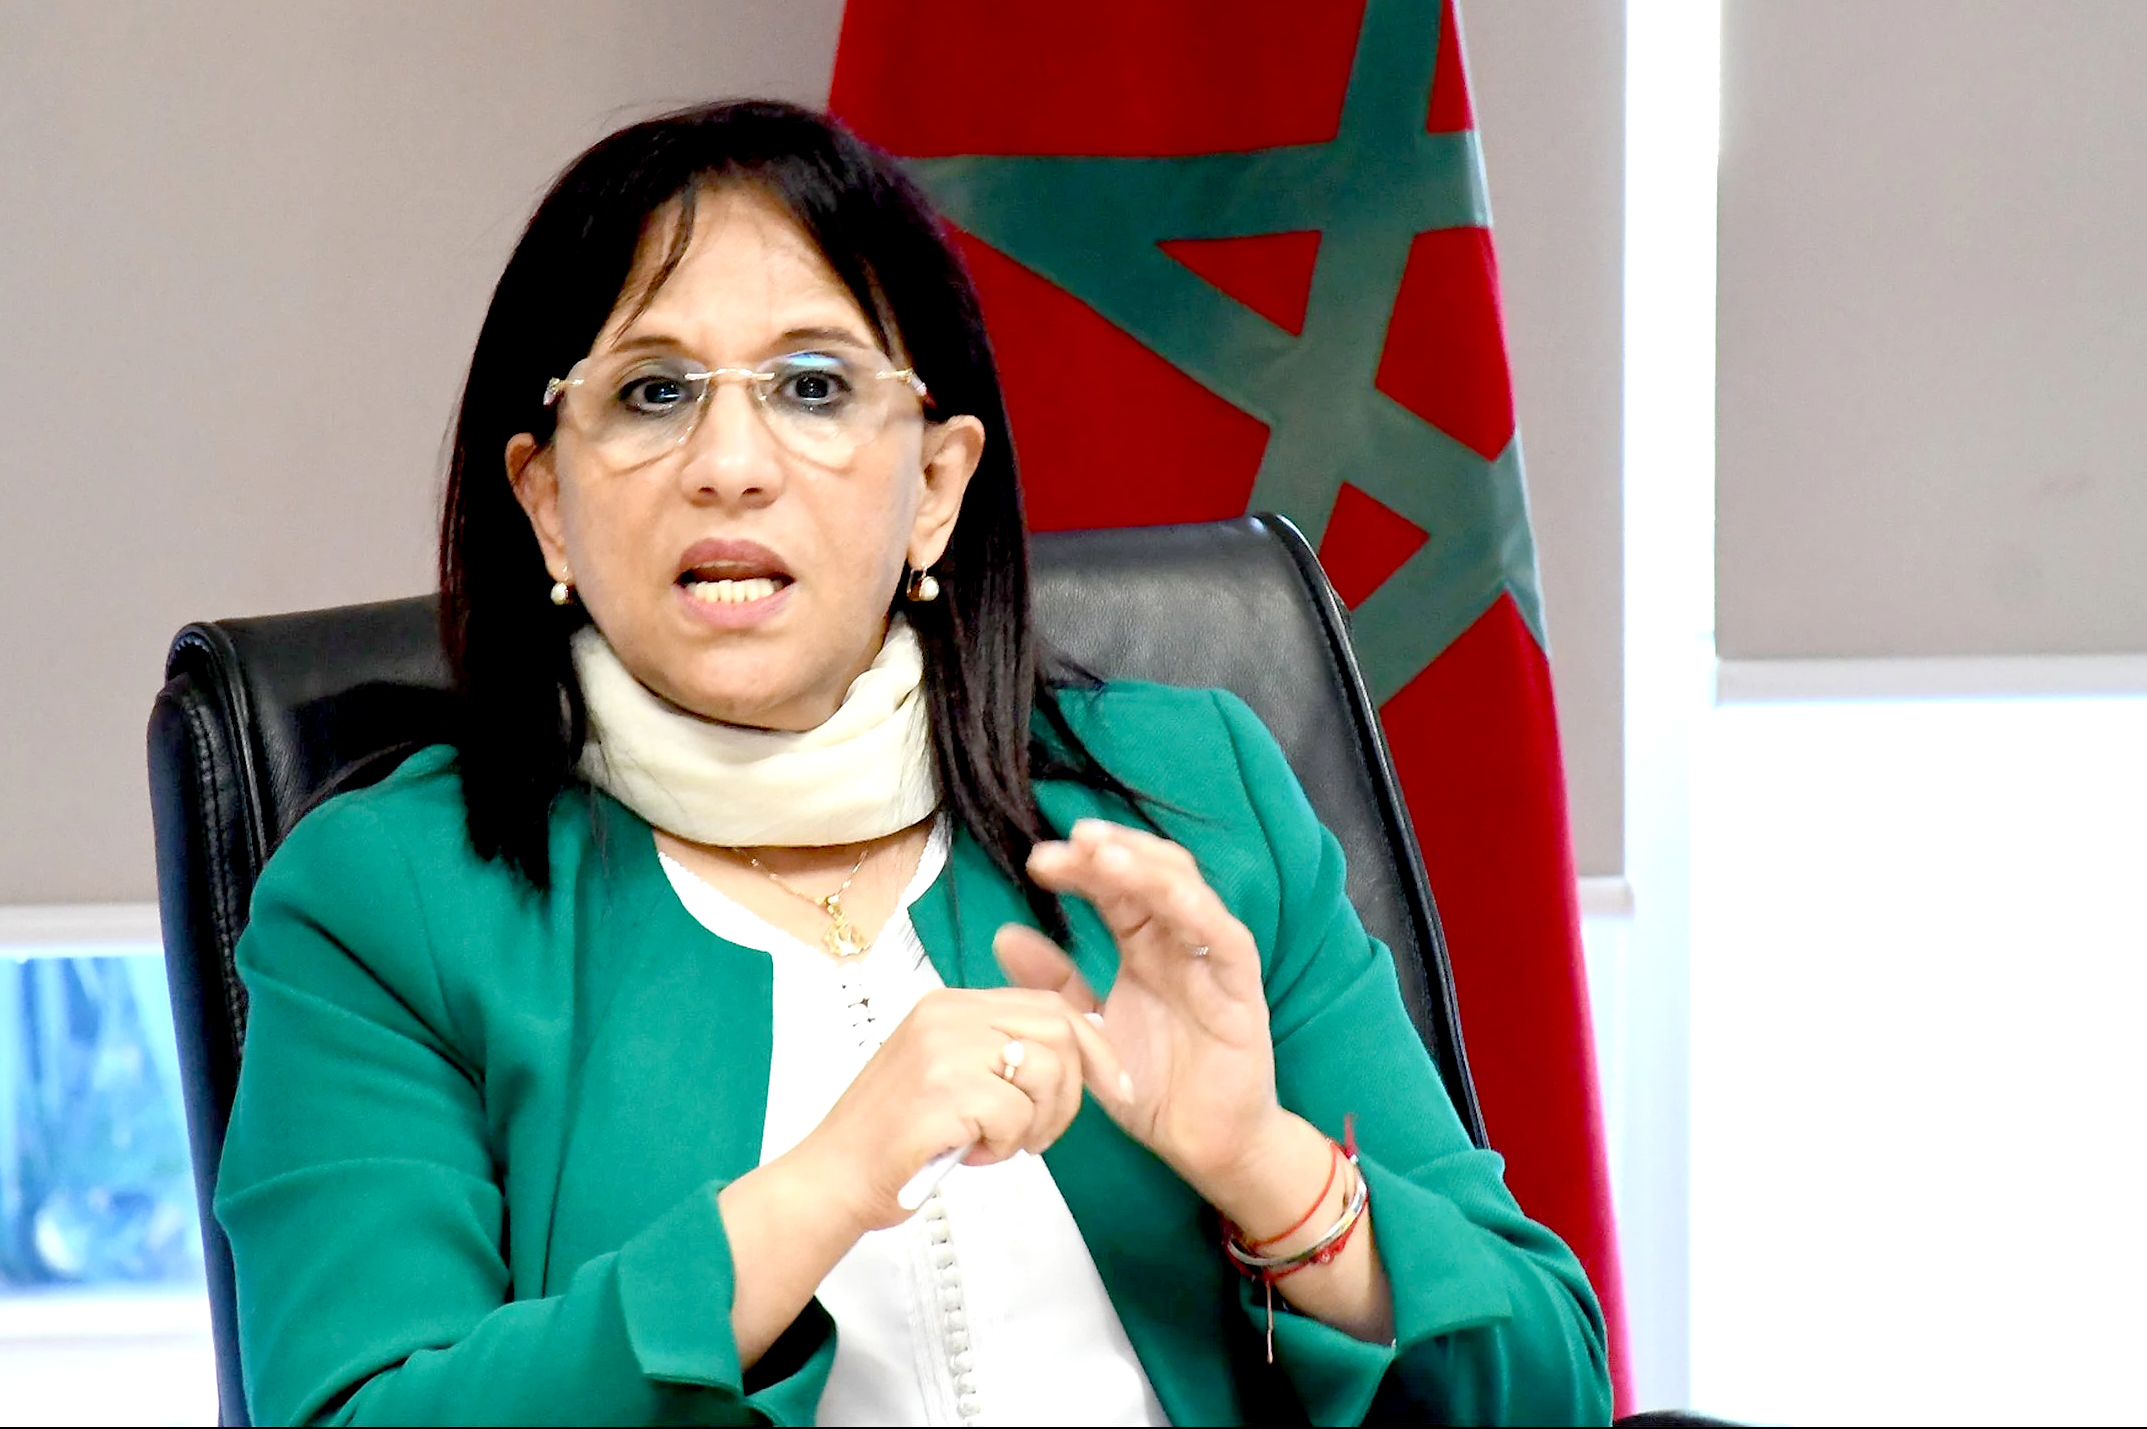 Amina Bouayach, President of the National Council for Human Rights, affirmed the achievements Morocco has made in Human Rights.